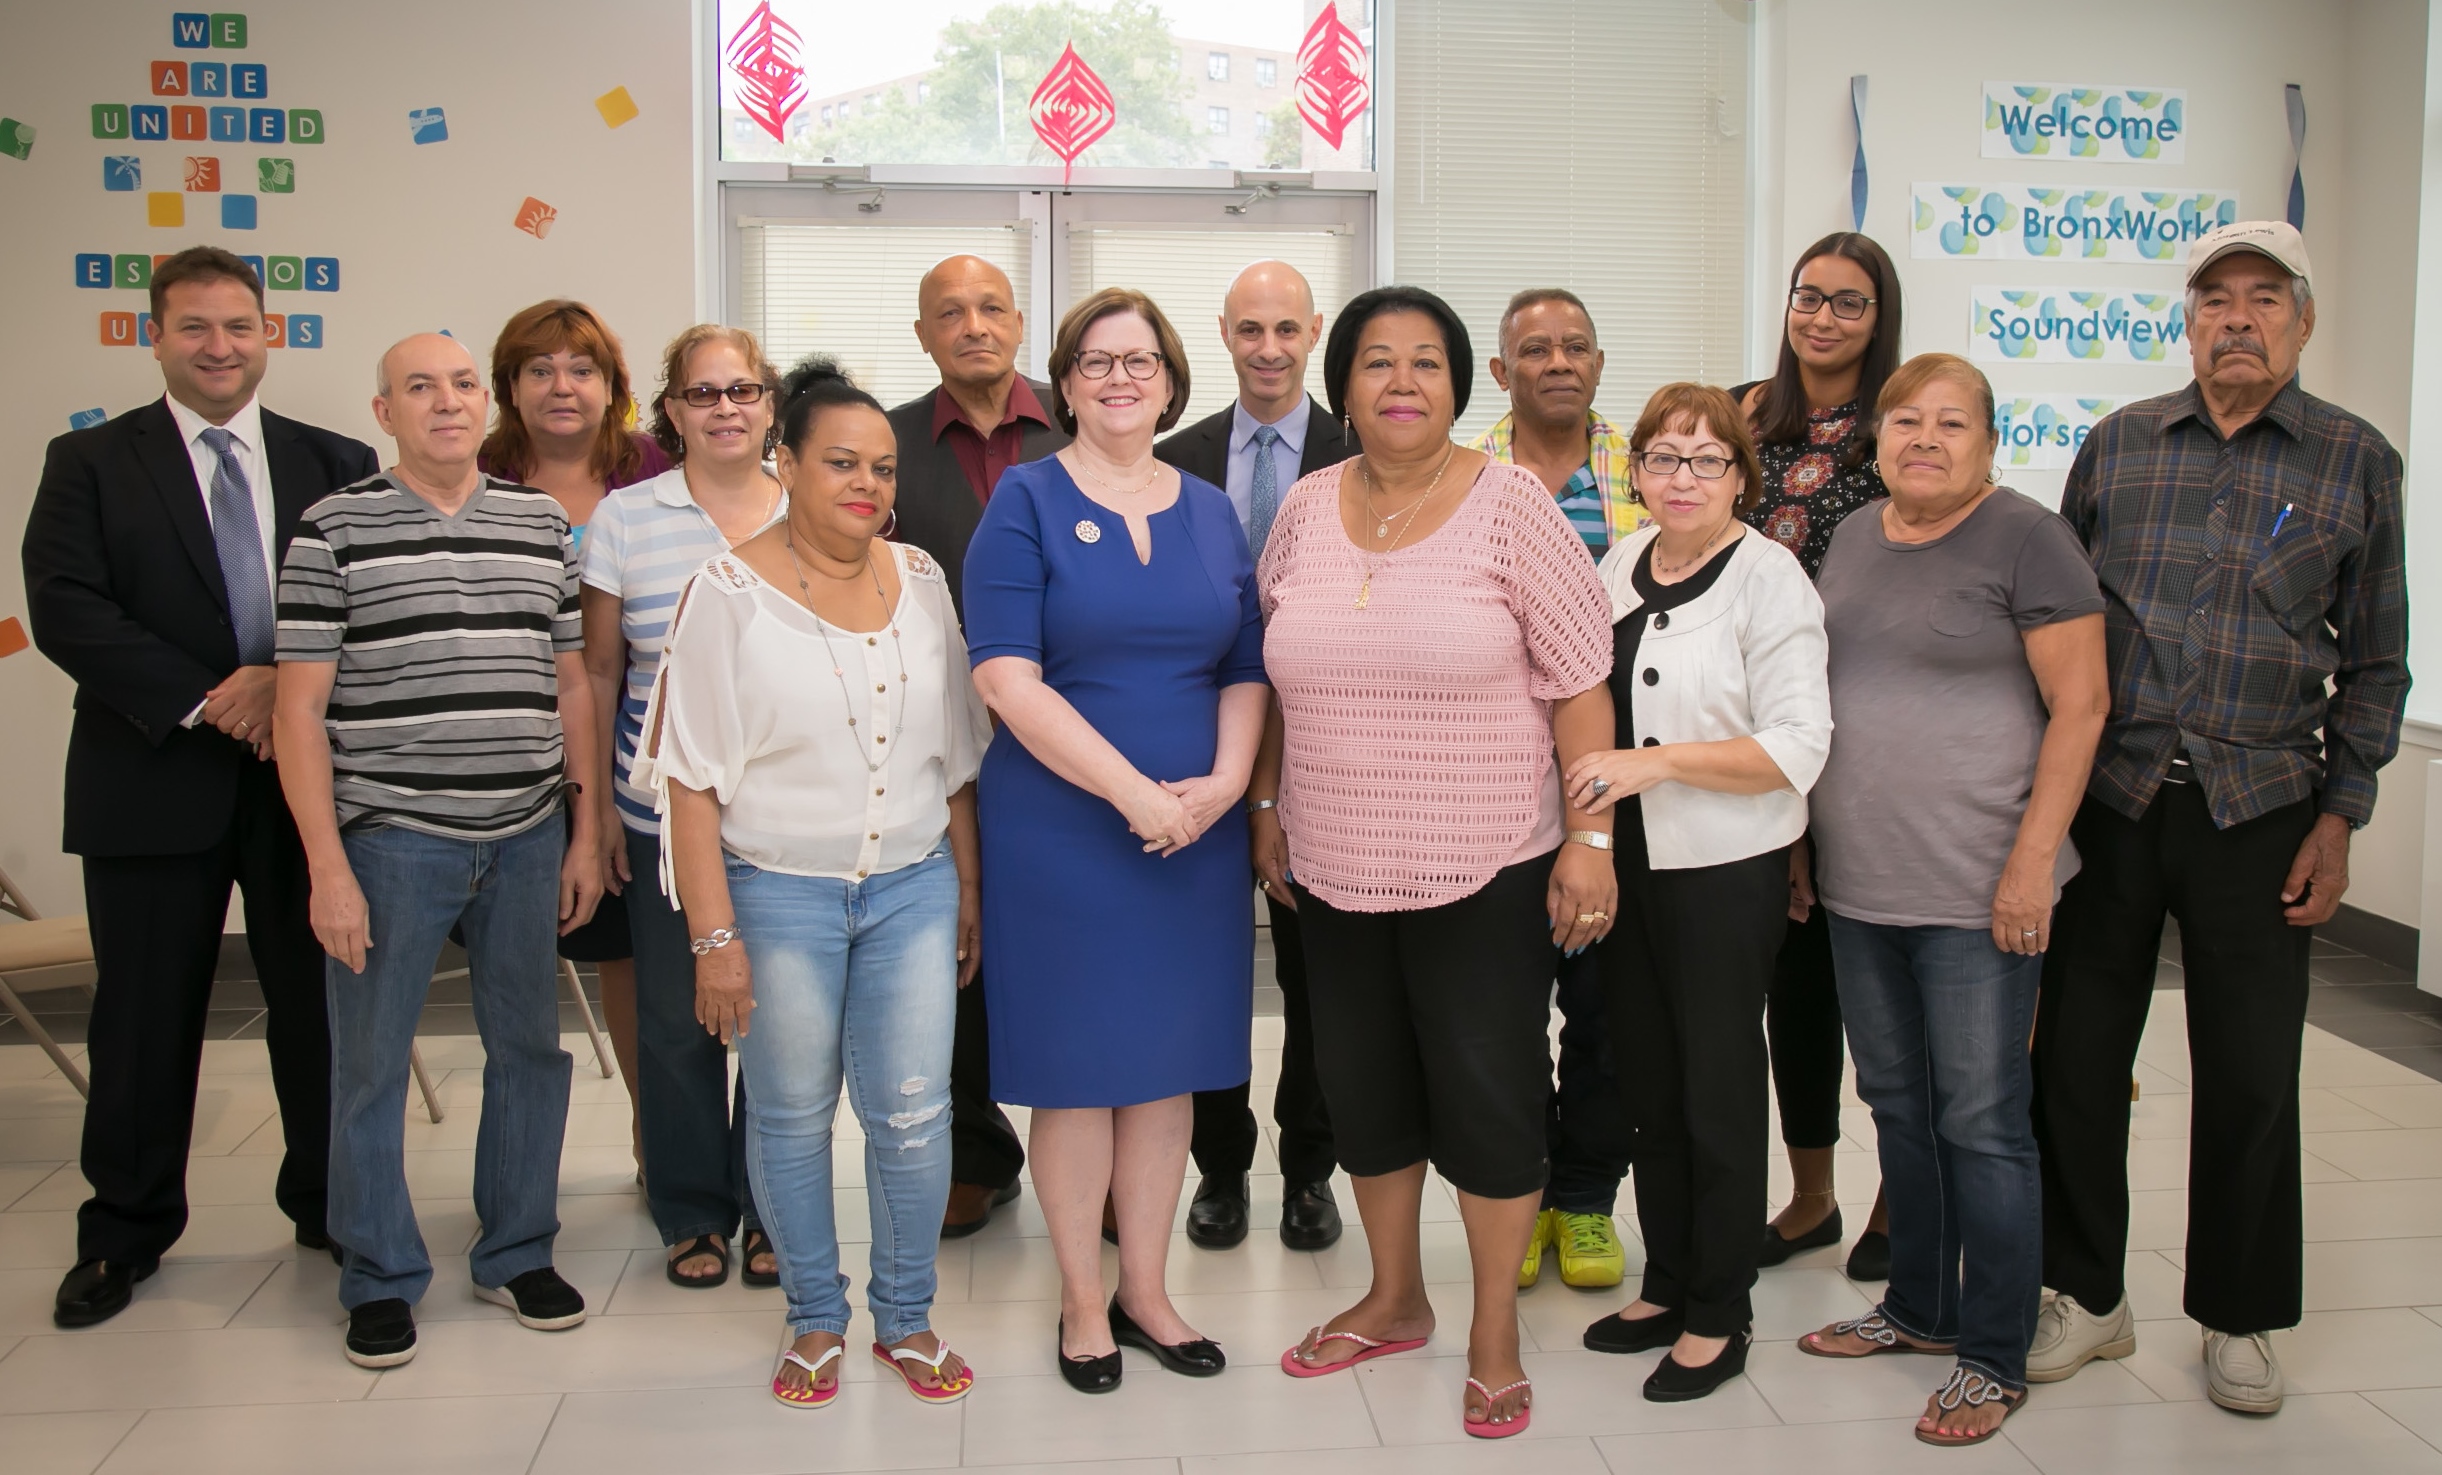 NYCHA staff and Soundview Senior Housing residents